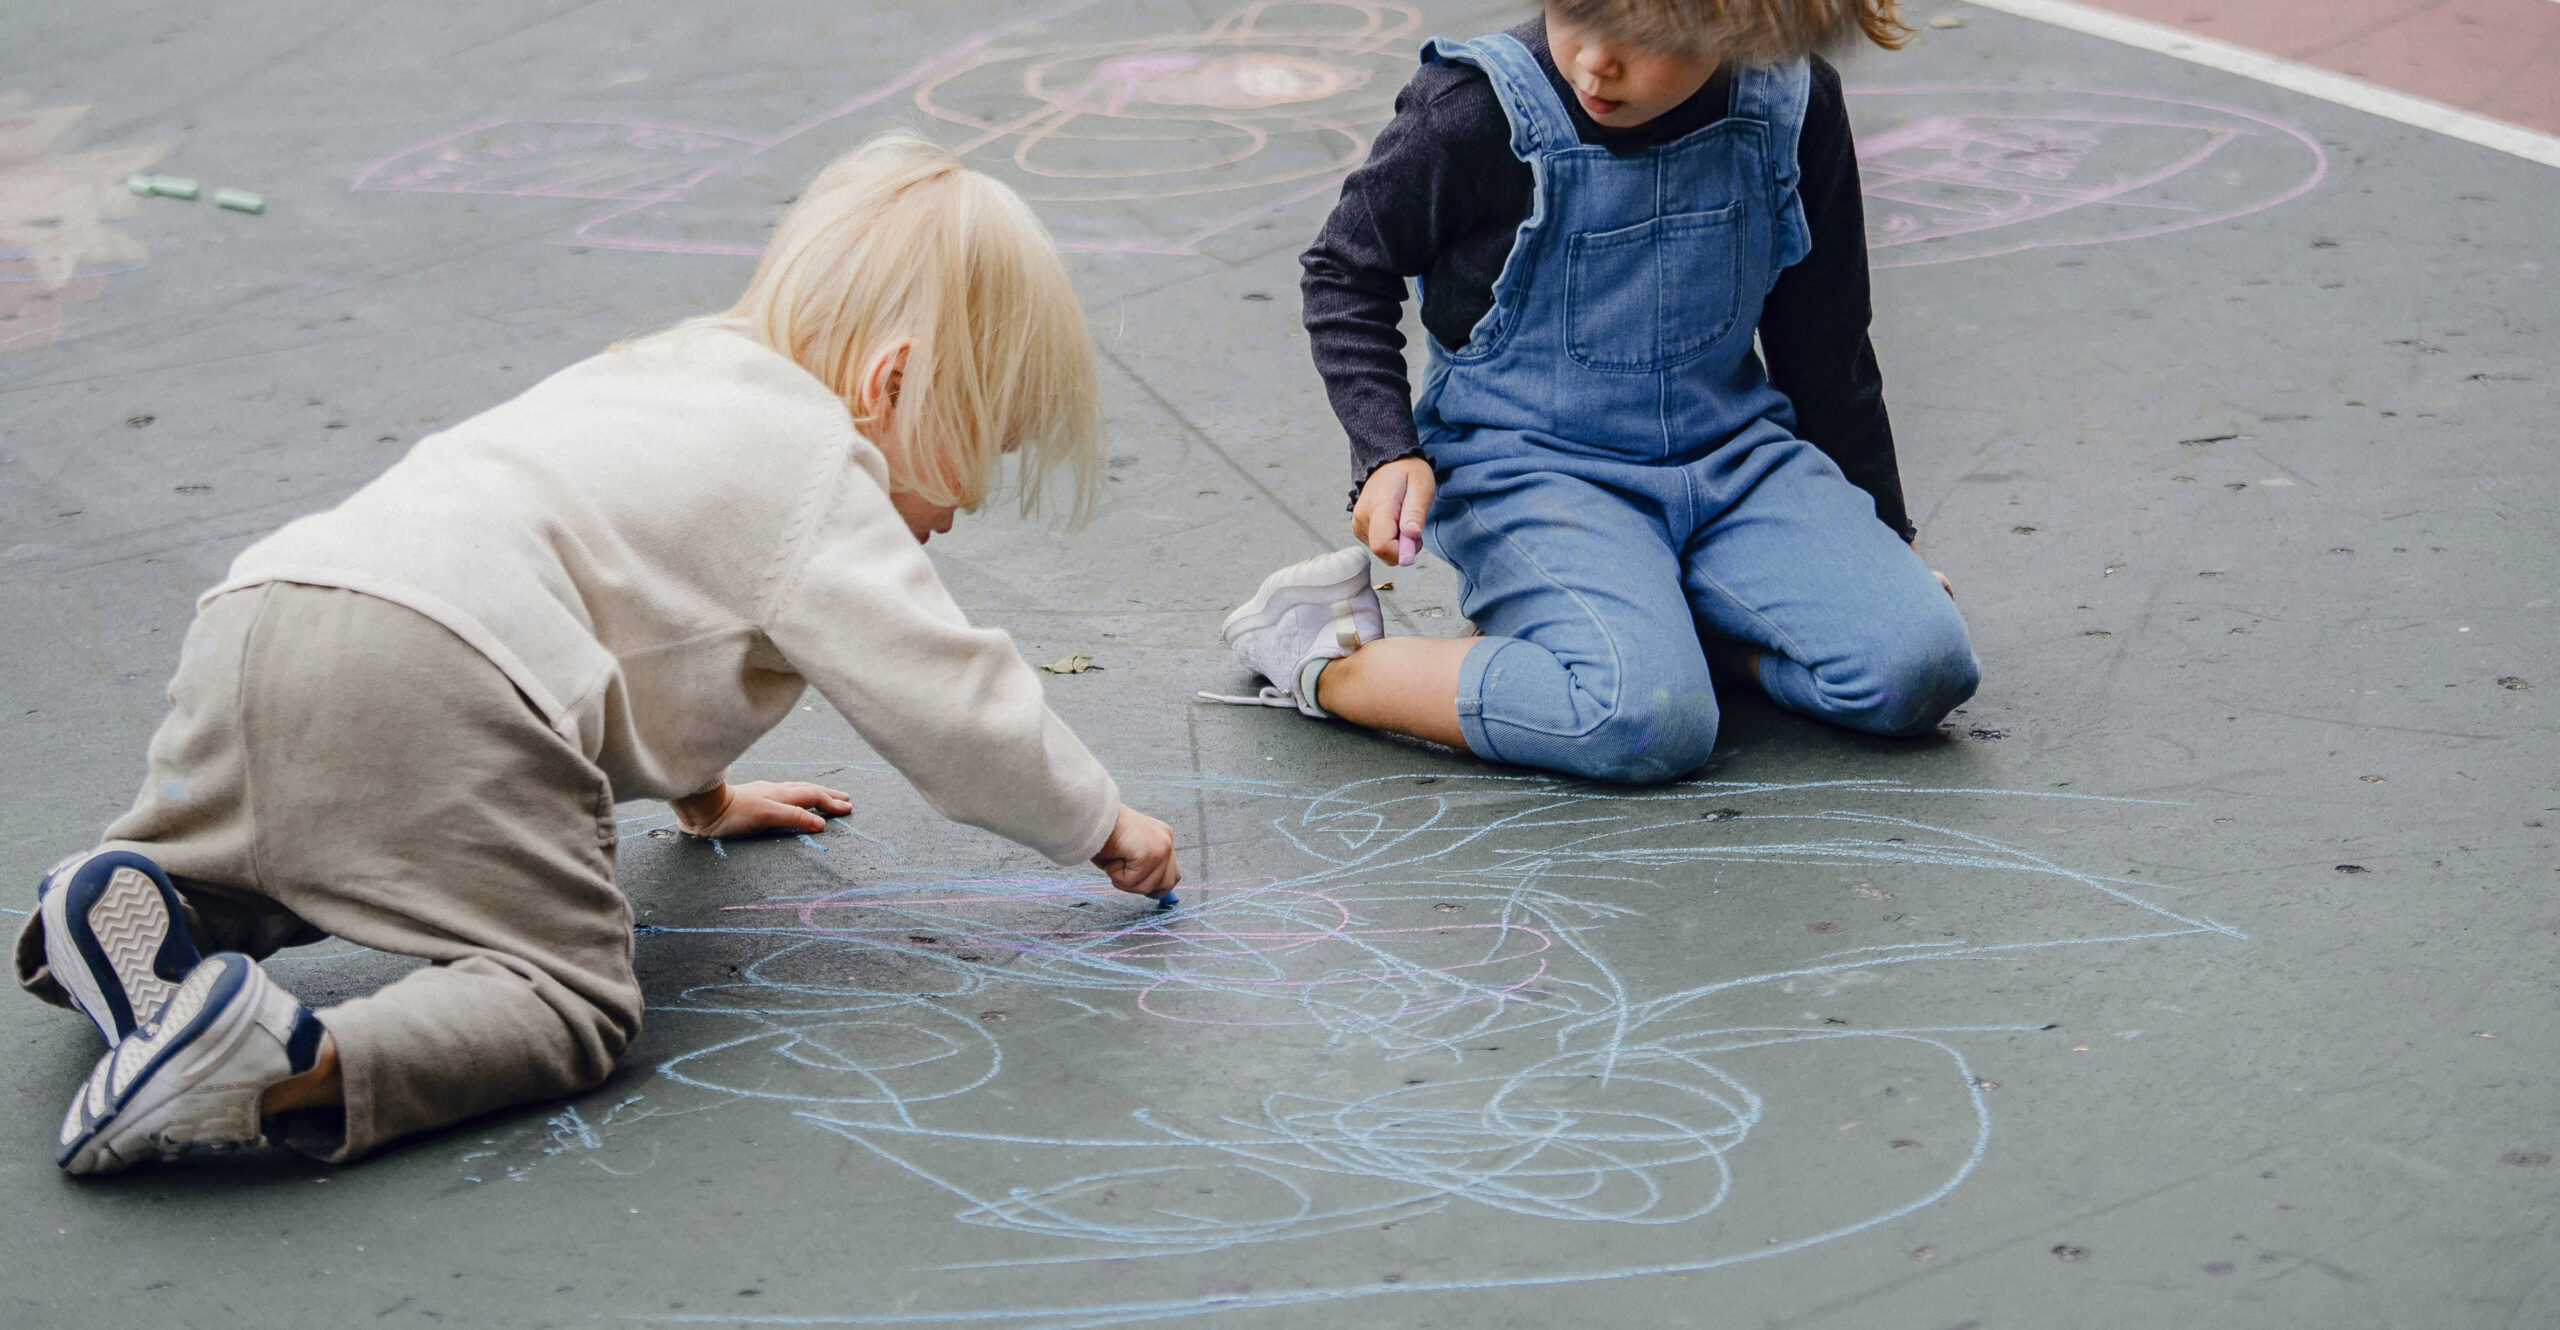 two children drawing on the road with chalk